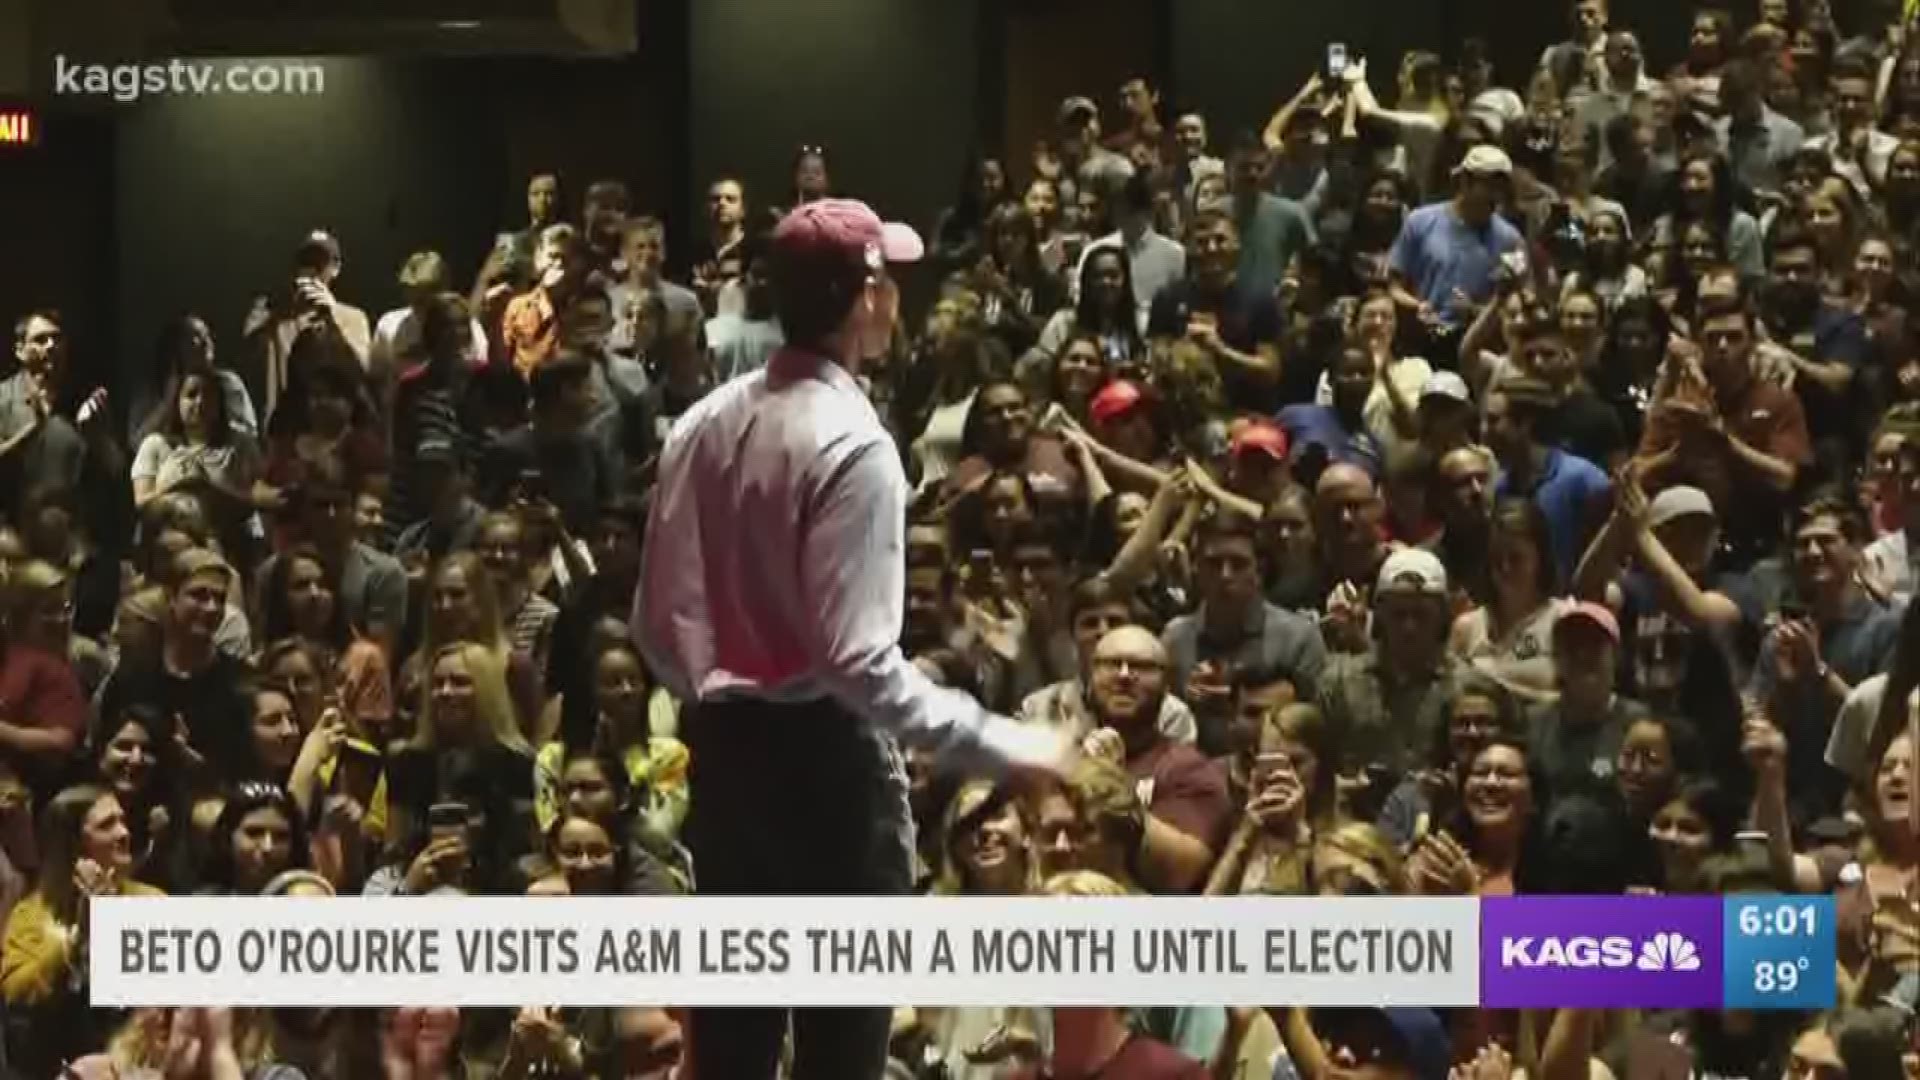 Beto O'Rourke was in town today for his sixth visit to the Brazos Valley this election cycle. He spoke to a crowd of approximately a thousand at A&M Rudder Auditorium.